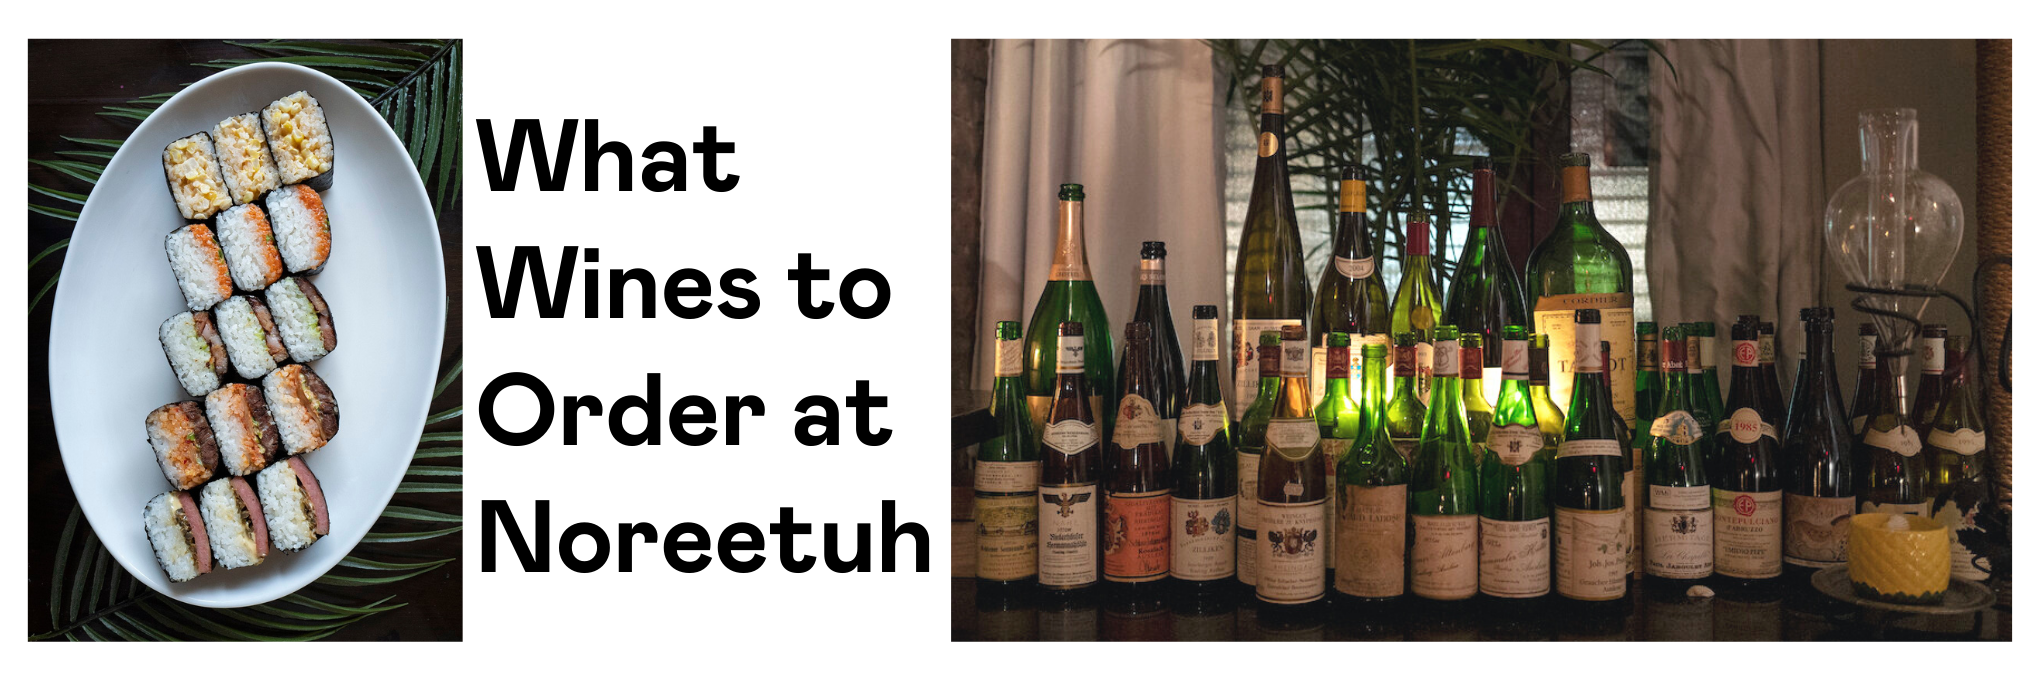 What to Wines to Order at Noreetuh